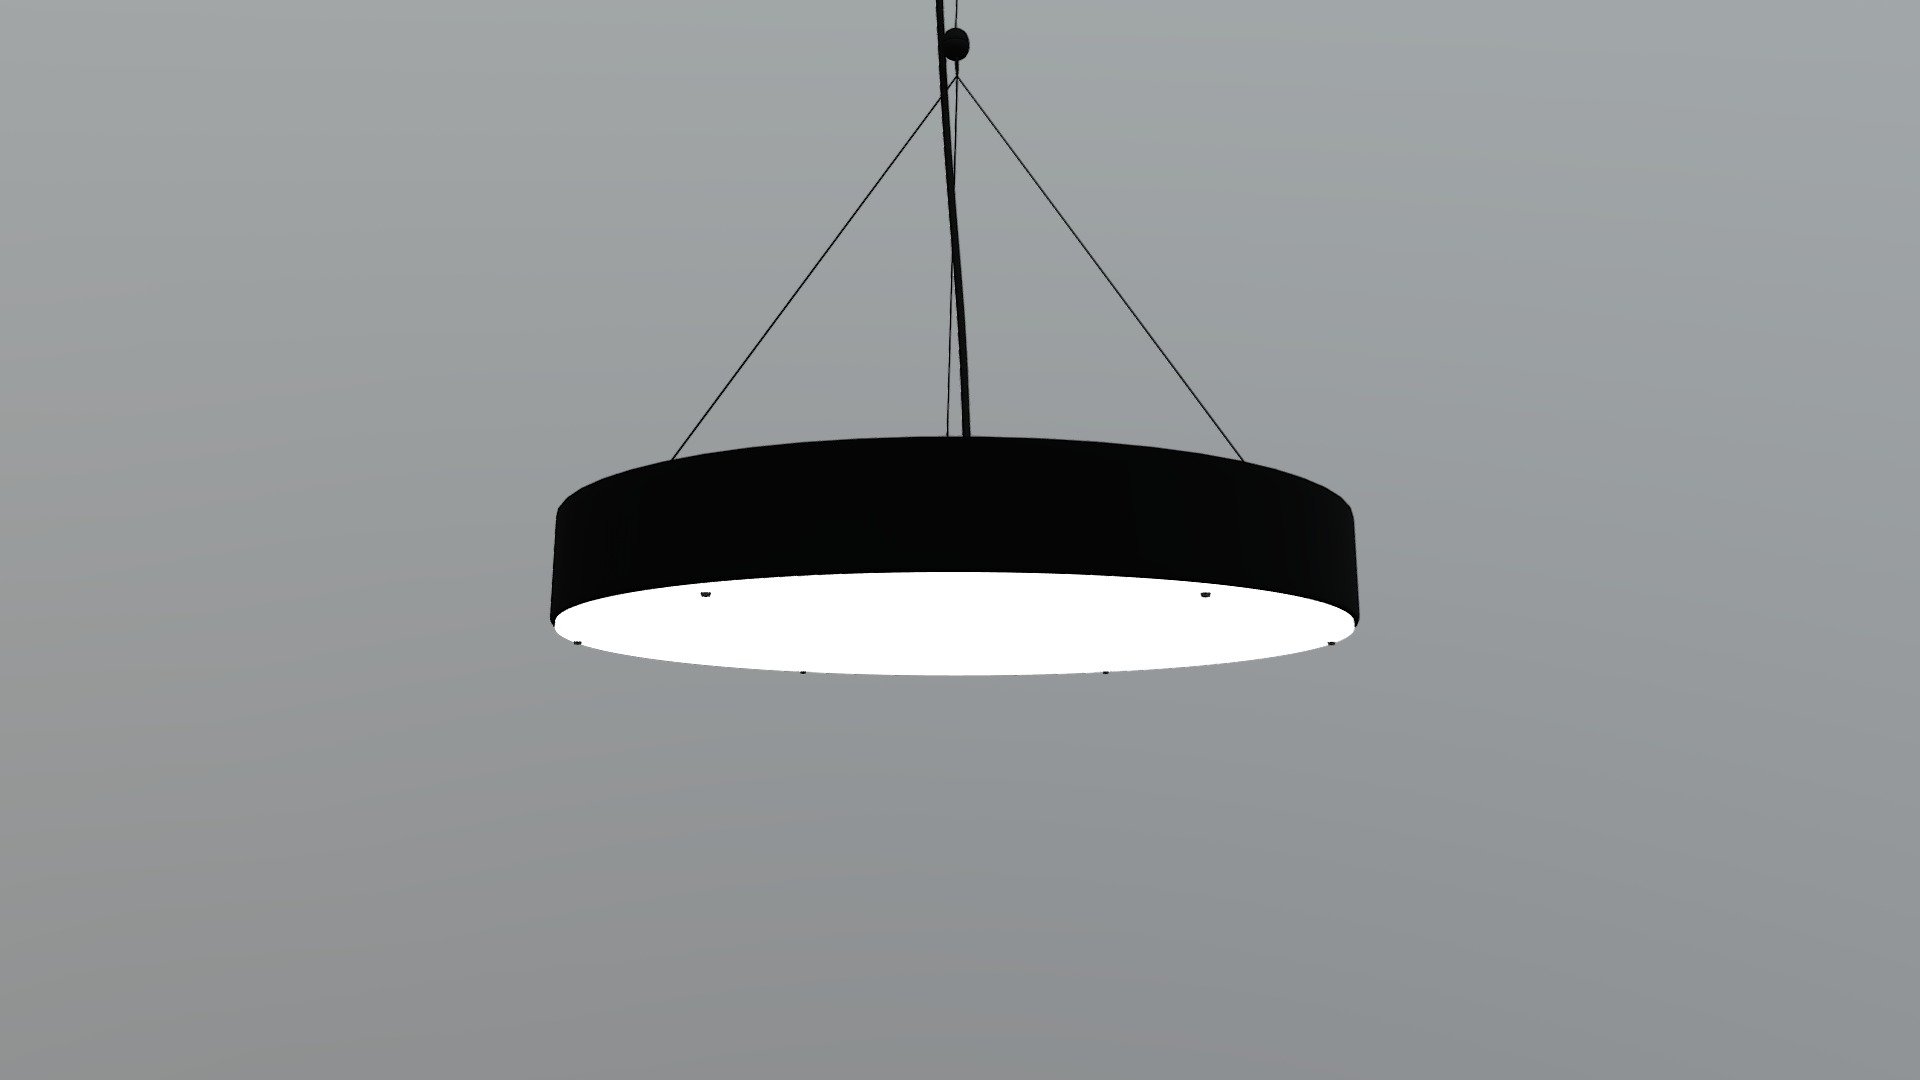 This floating pendant light is minimal in design and sleek in style. Its circular outer band in matte black metal provides a simple silhouette that works with any decor. Suspend it over a kitchen island or dining table to create an elegant glow. www.zuomod.com/apricot-ceiling-lamp-matte-black - Apricot Ceiling Lamp Matte Black - 56051 - Buy Royalty Free 3D model by Zuo Modern (@zuo) 3d model